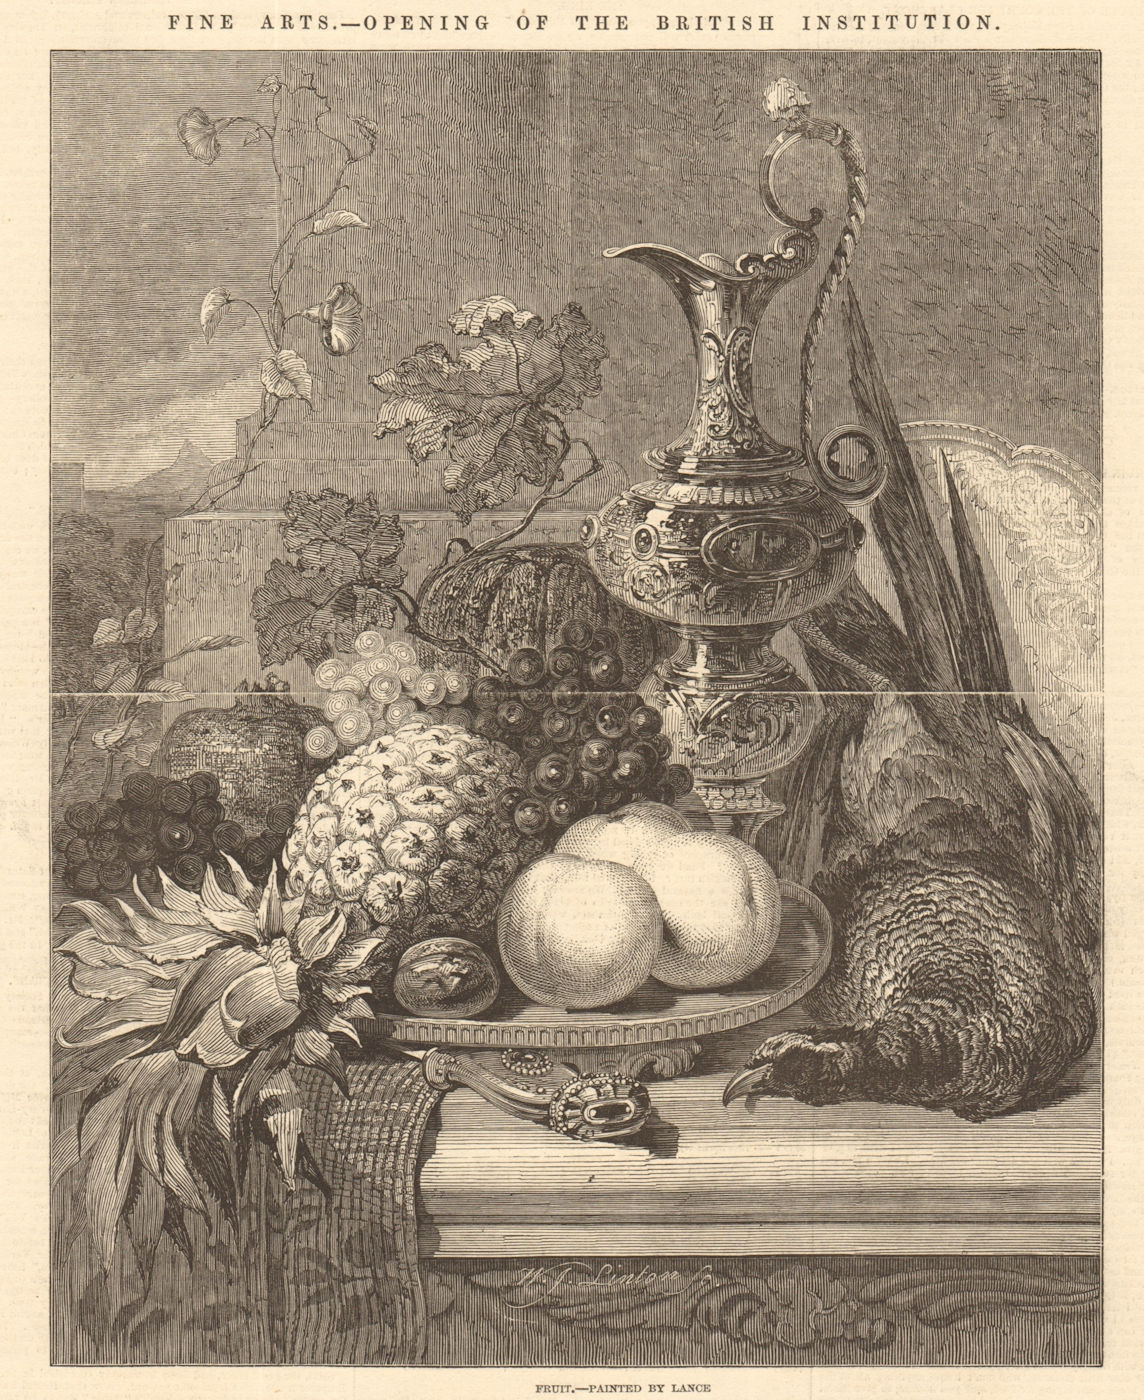 Associate Product "Fruit", painted by Lance. Fine Arts. Pineapple. Jug 1846 ILN full page print